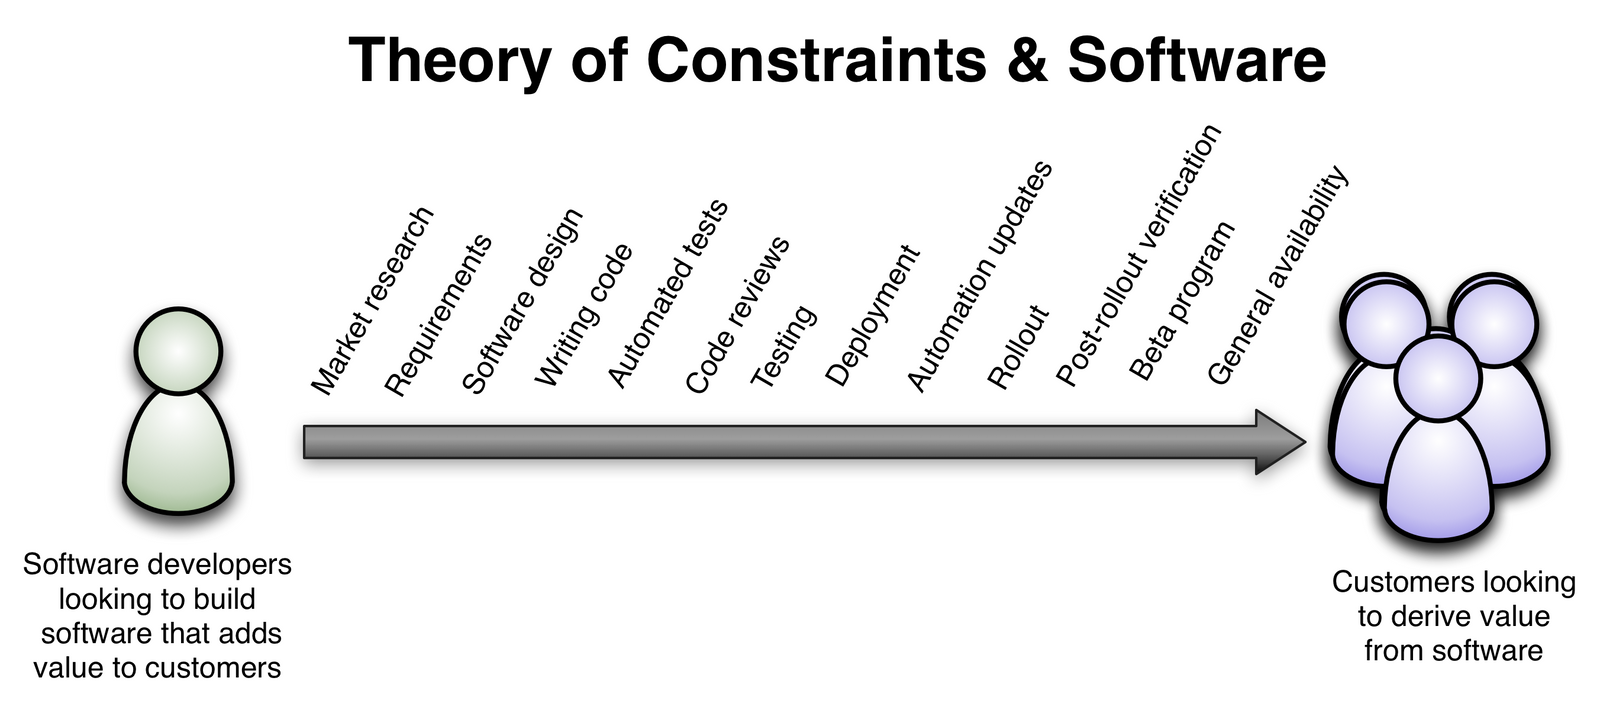 Software: The Process Is the Constraint